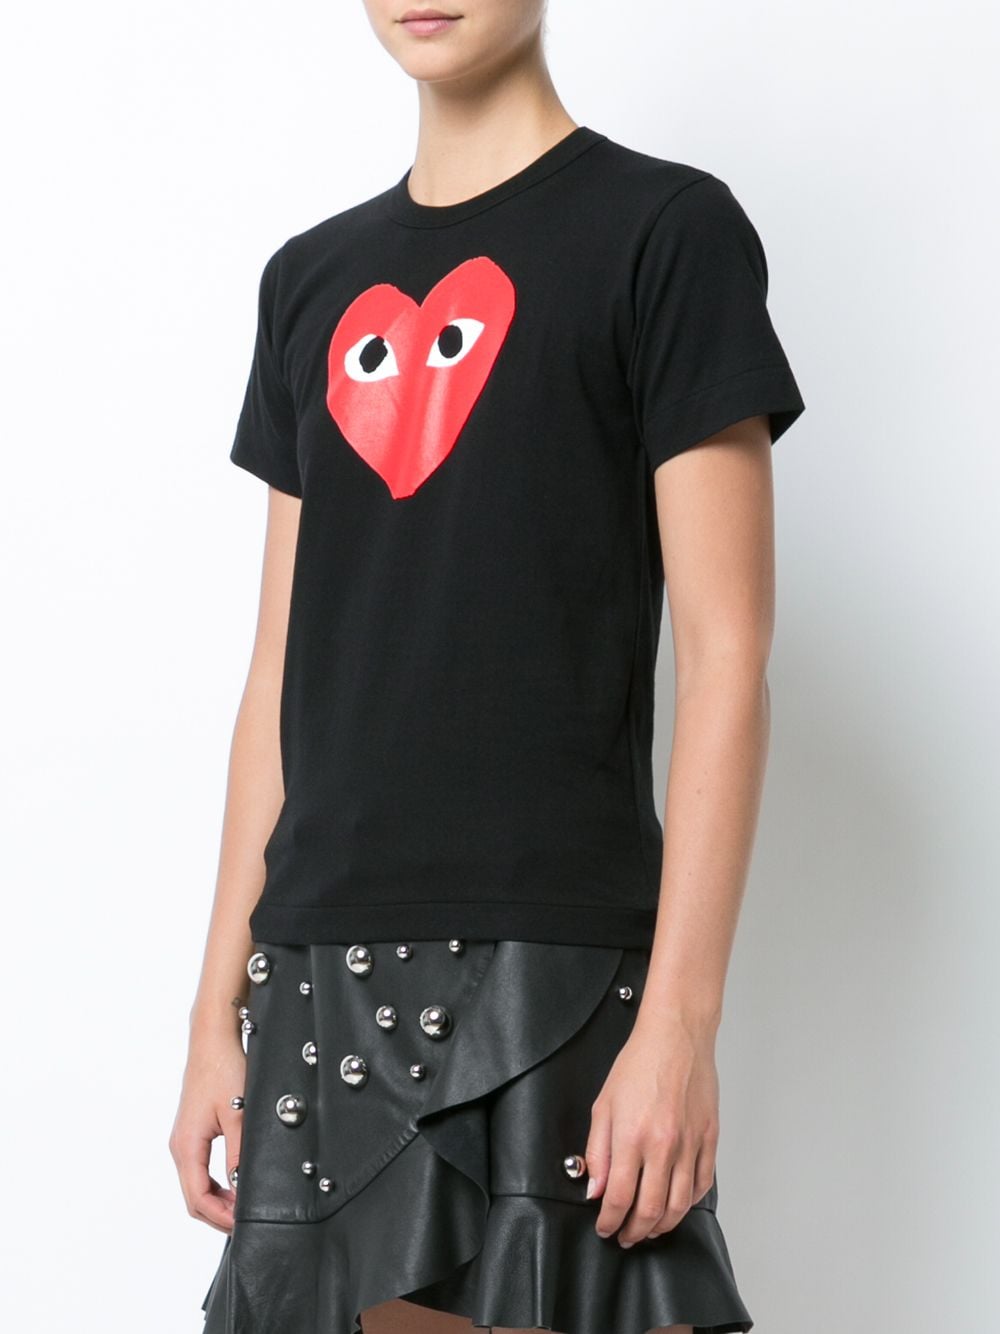 Crew-neck T-shirt in black with red heart print